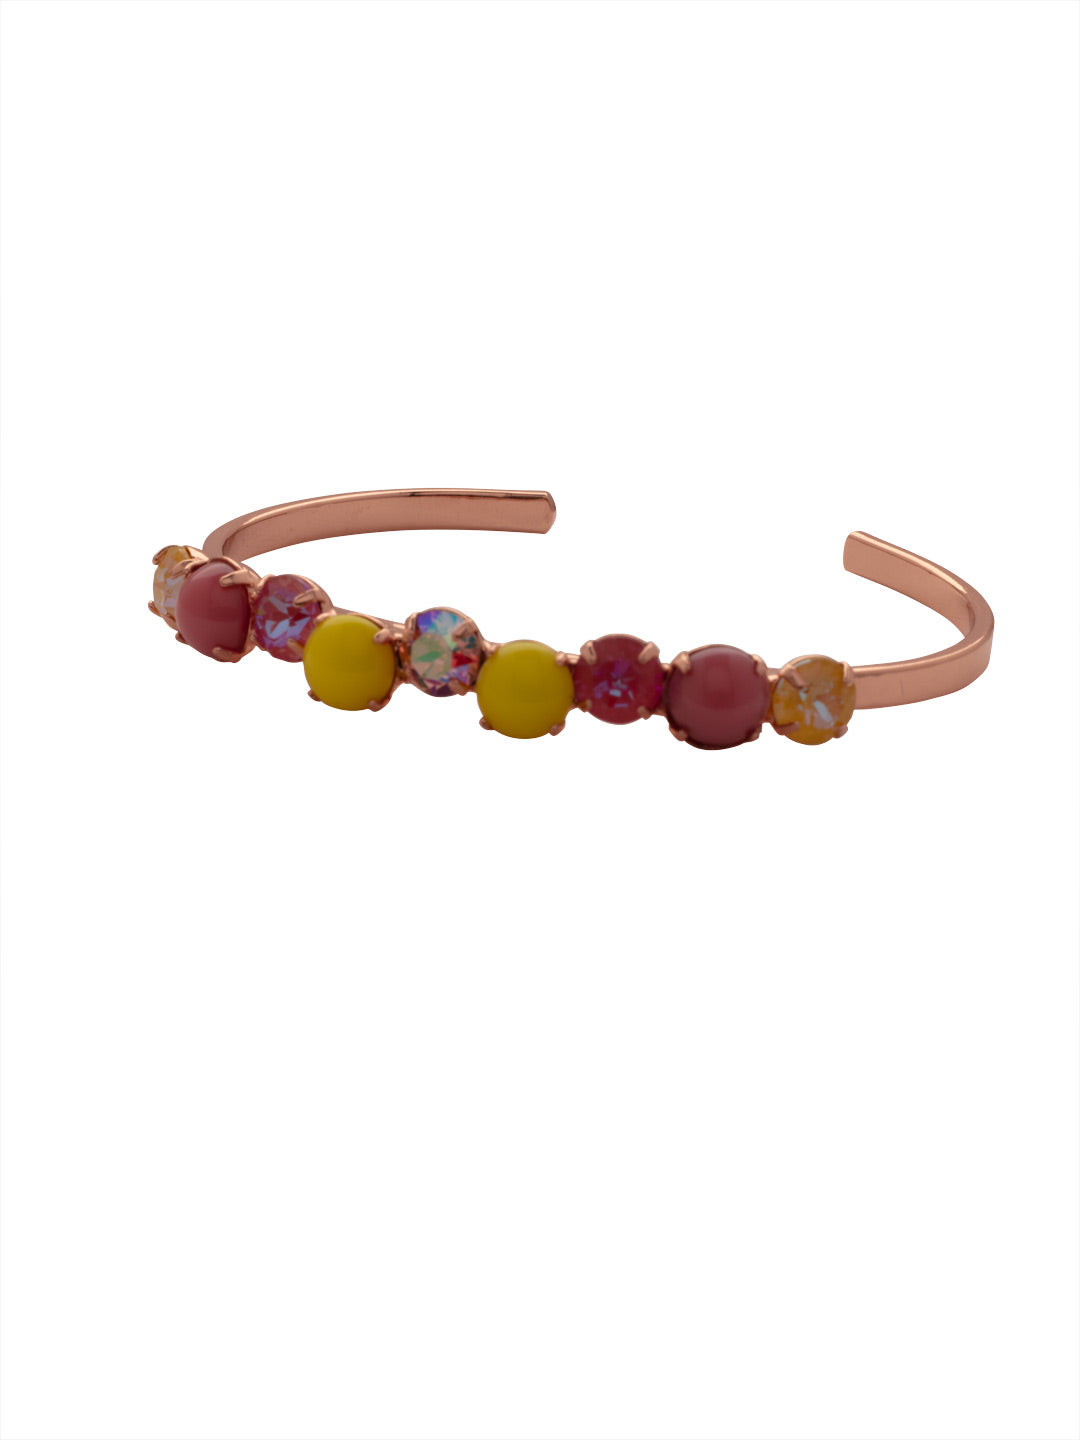 Xena Cuff Bracelet - BFF11RGPPN - <p>A row of delicate semi-precious stones are highlighted on a thin adjustable metal cuff, creating the Xena Cuff Bracelet. From Sorrelli's Pink Pineapple collection in our Rose Gold-tone finish.</p>